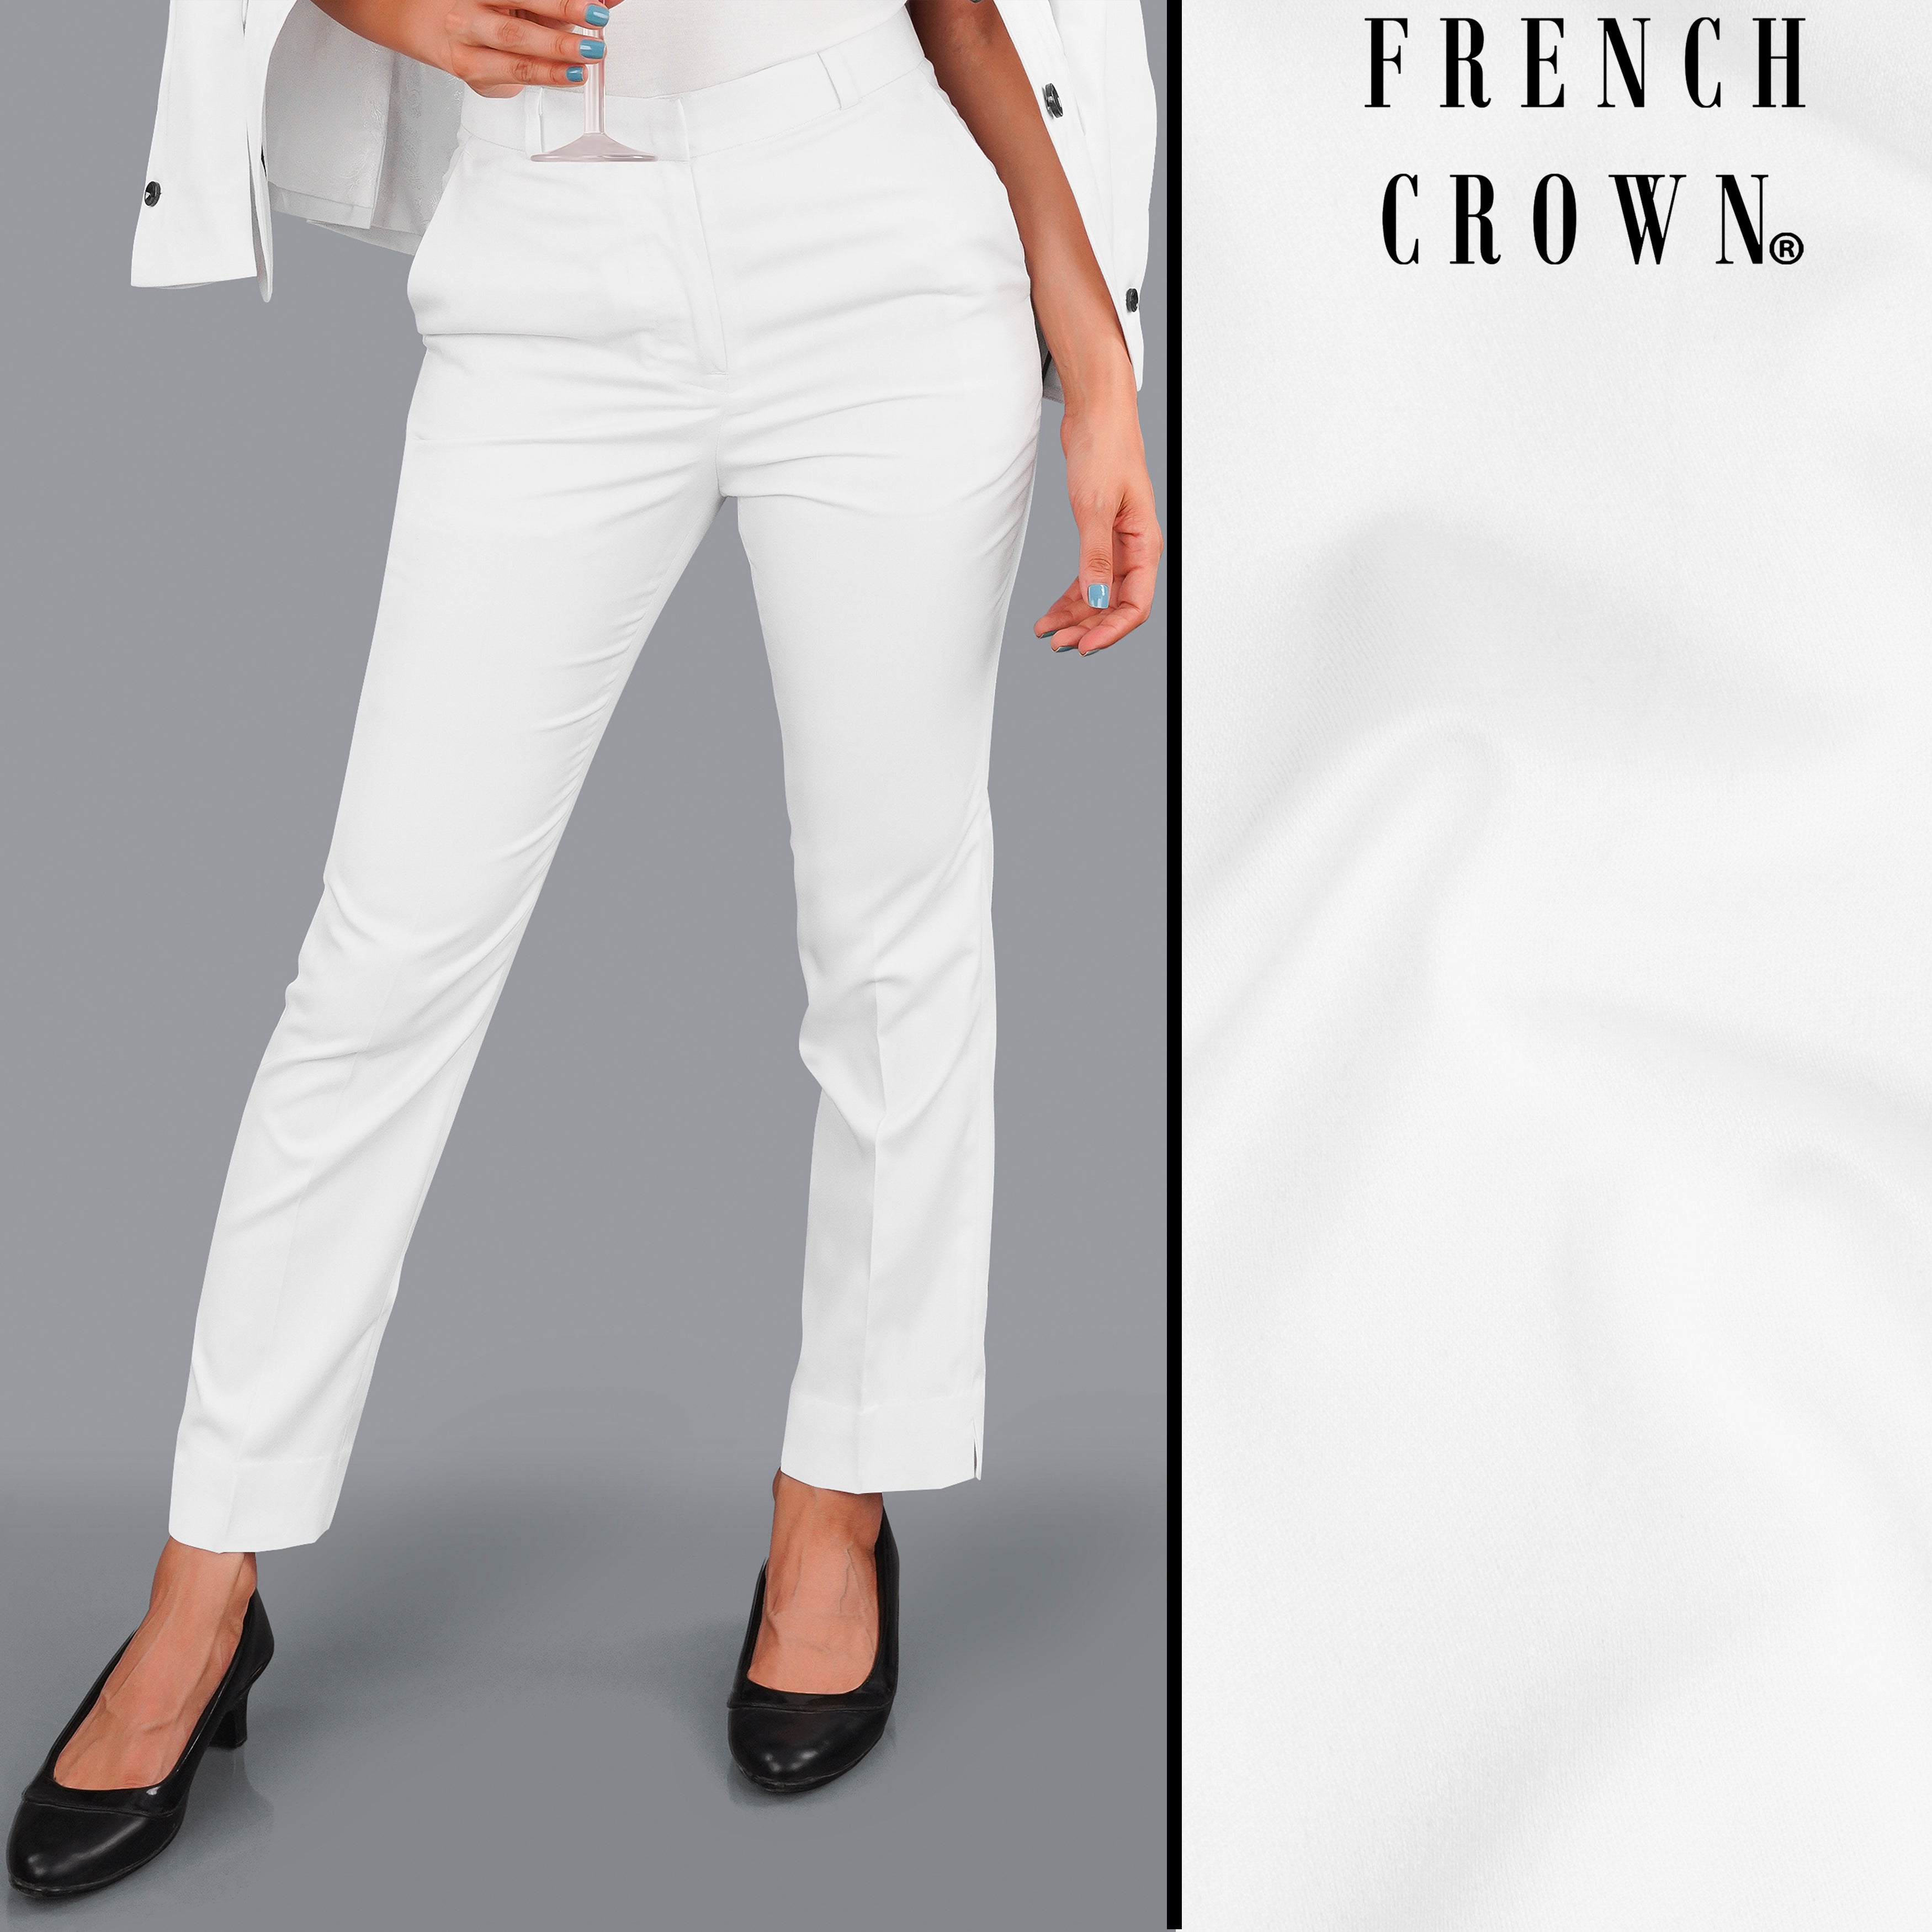 french crown Regular Fit Men Green Trousers - Buy french crown Regular Fit  Men Green Trousers Online at Best Prices in India | Flipkart.com